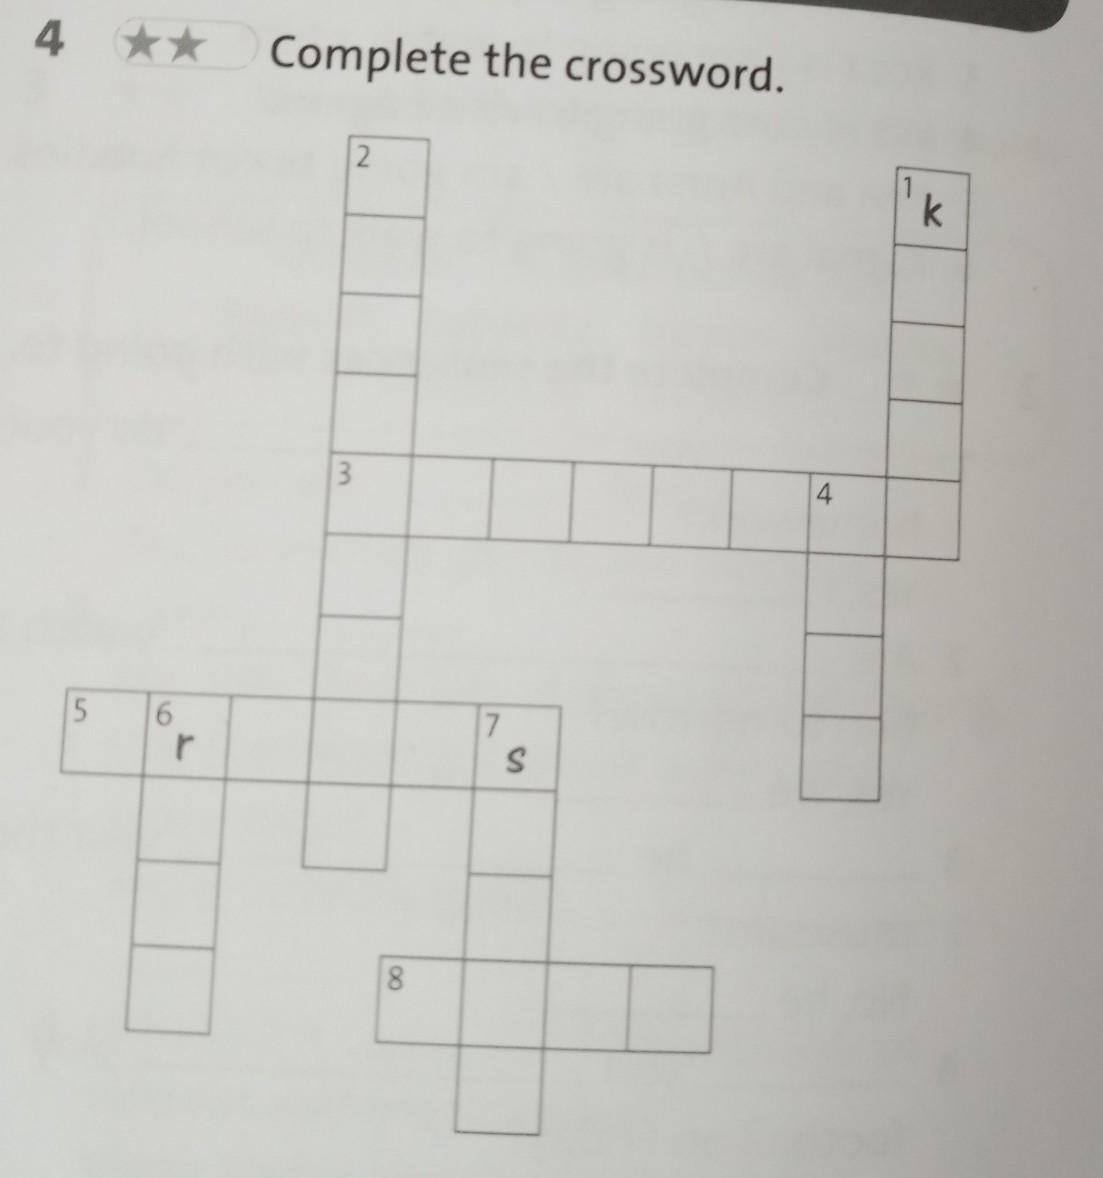 1 complete the crossword across. 1 Complete the crossword. Complete the crossword. Down across. Complete the crossword 5 класс down. Complete the crossword one.